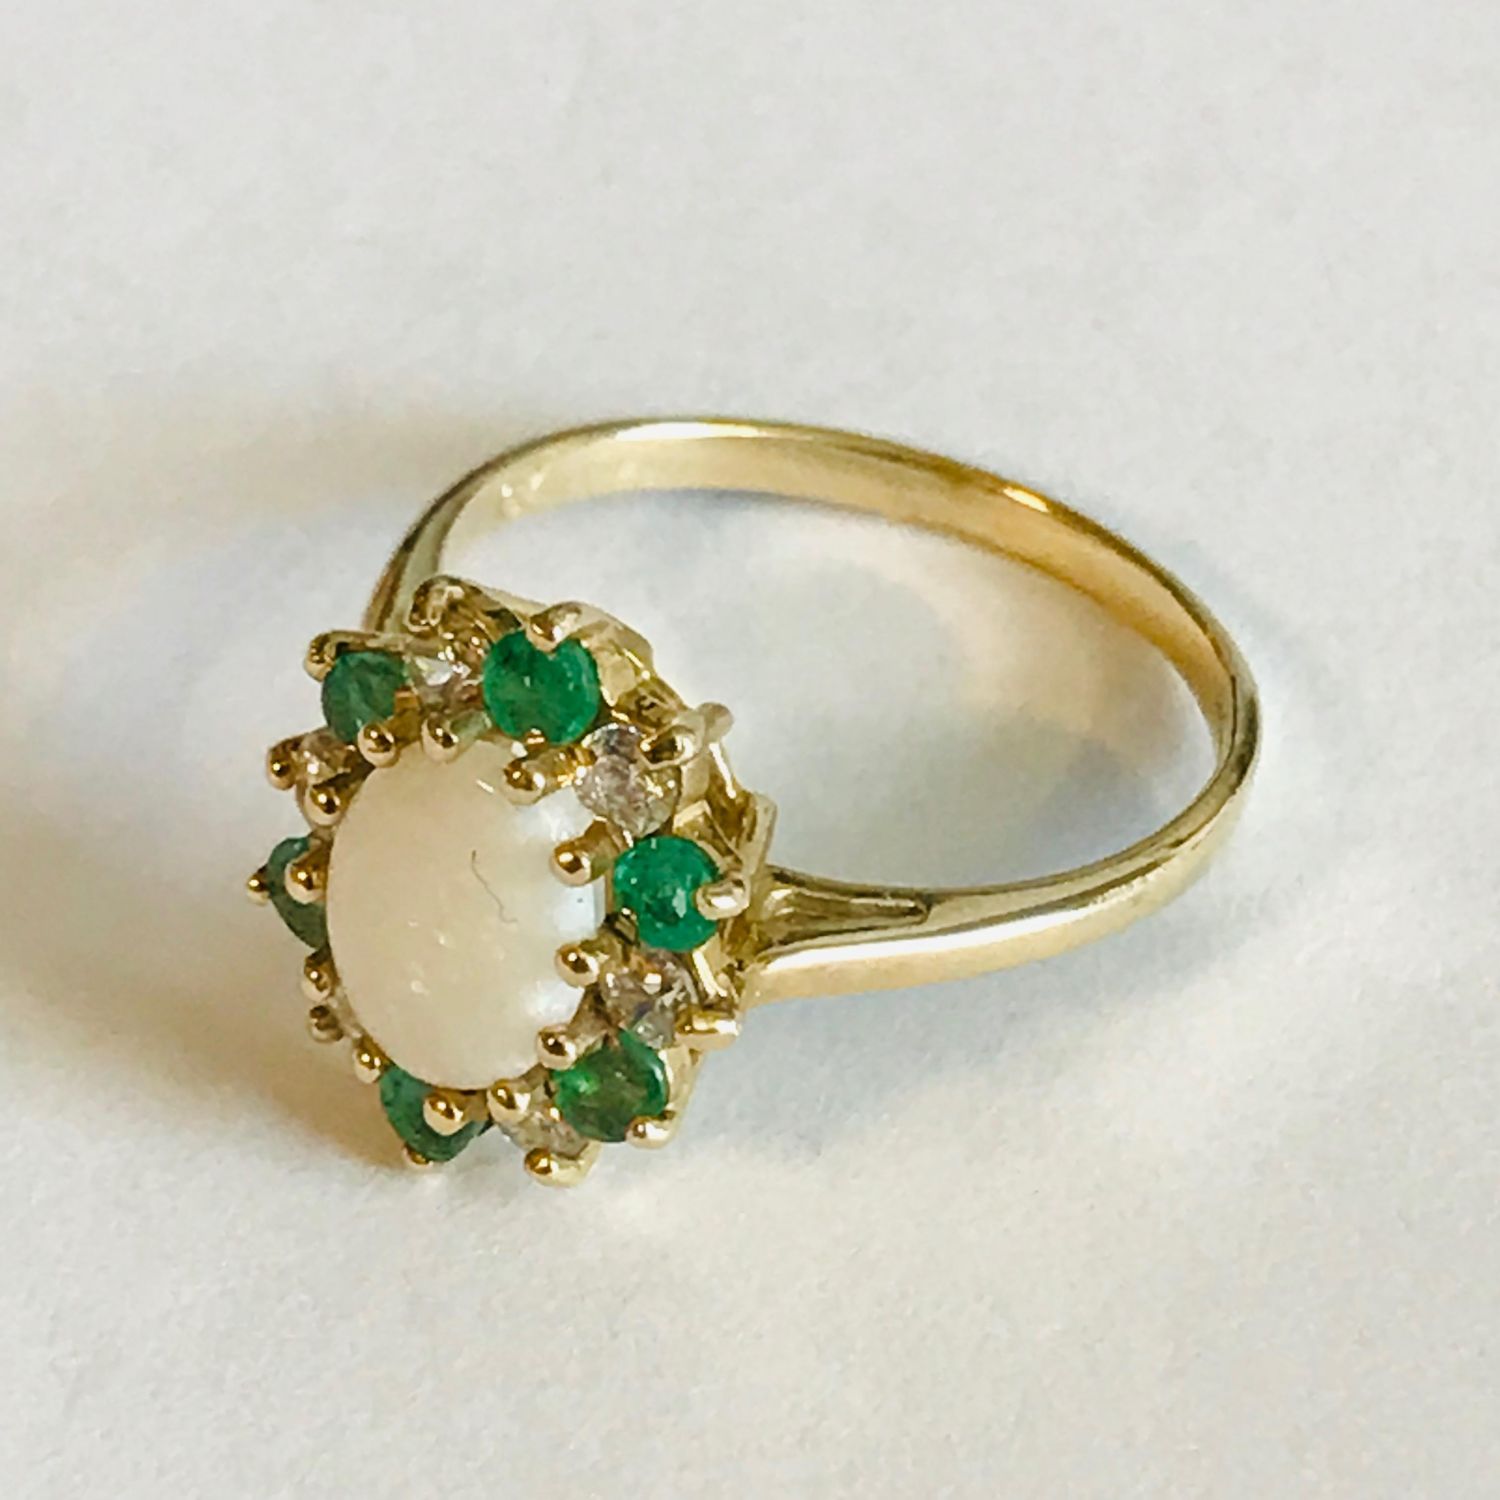 Vintage Opal and Emerald Ring - Jewellery & Gold - Hemswell Antique Centres